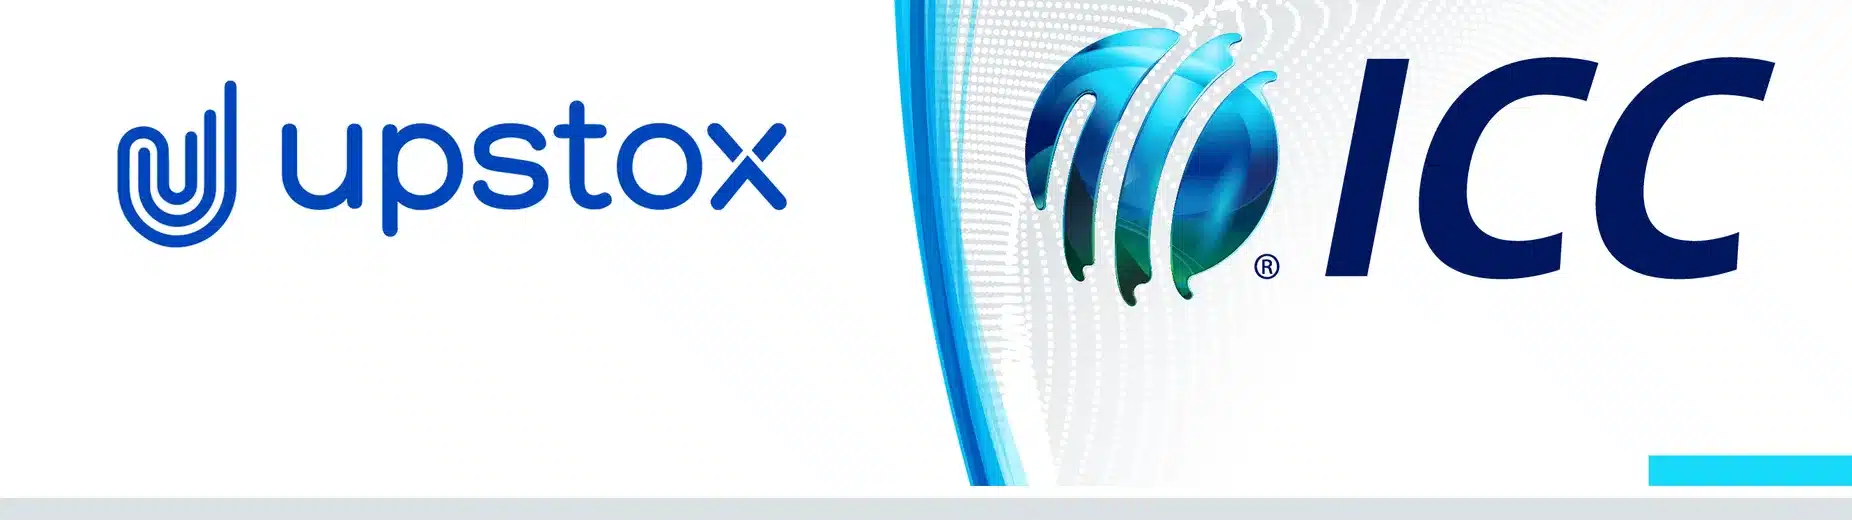 Upstox - ICC Cricket World Cup 2023 Sponsors & Advertisers, ICC Official Partners